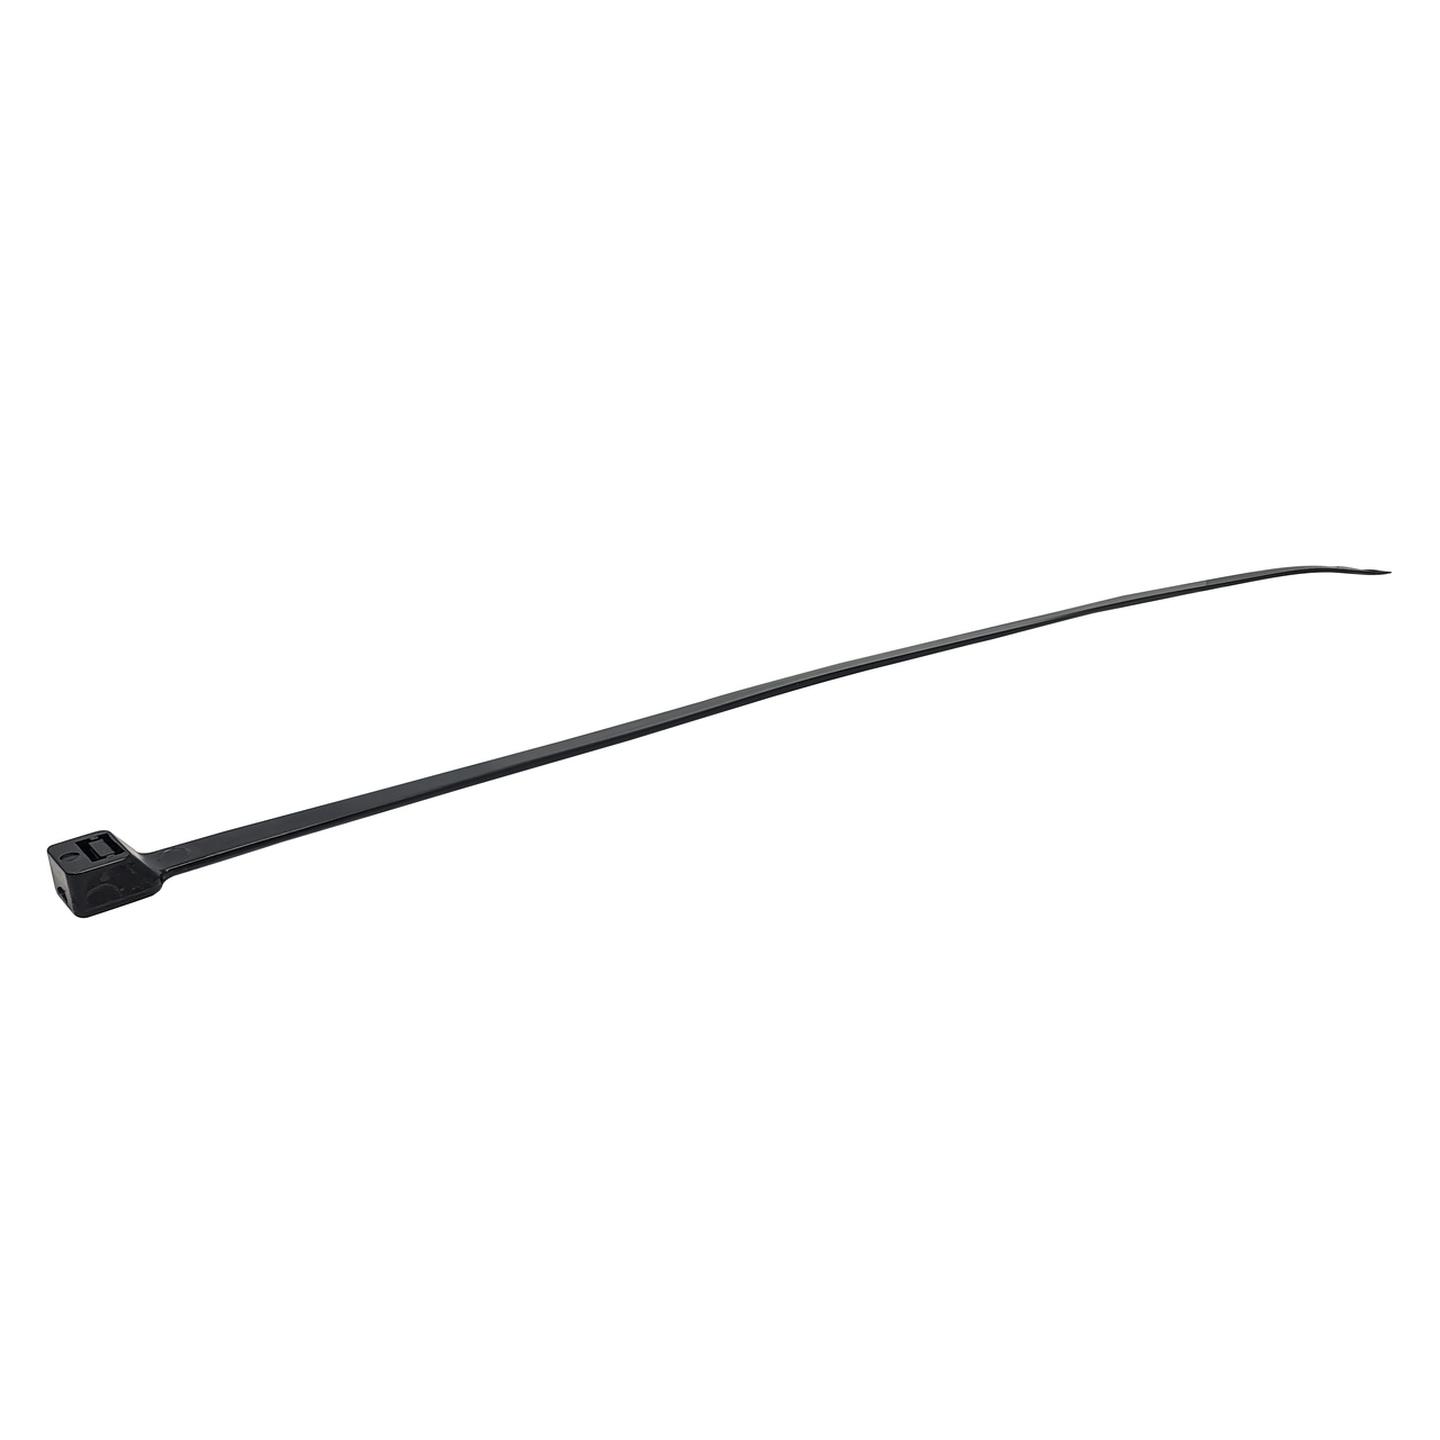 Cable Tie 605mm x 9mm pack of 15